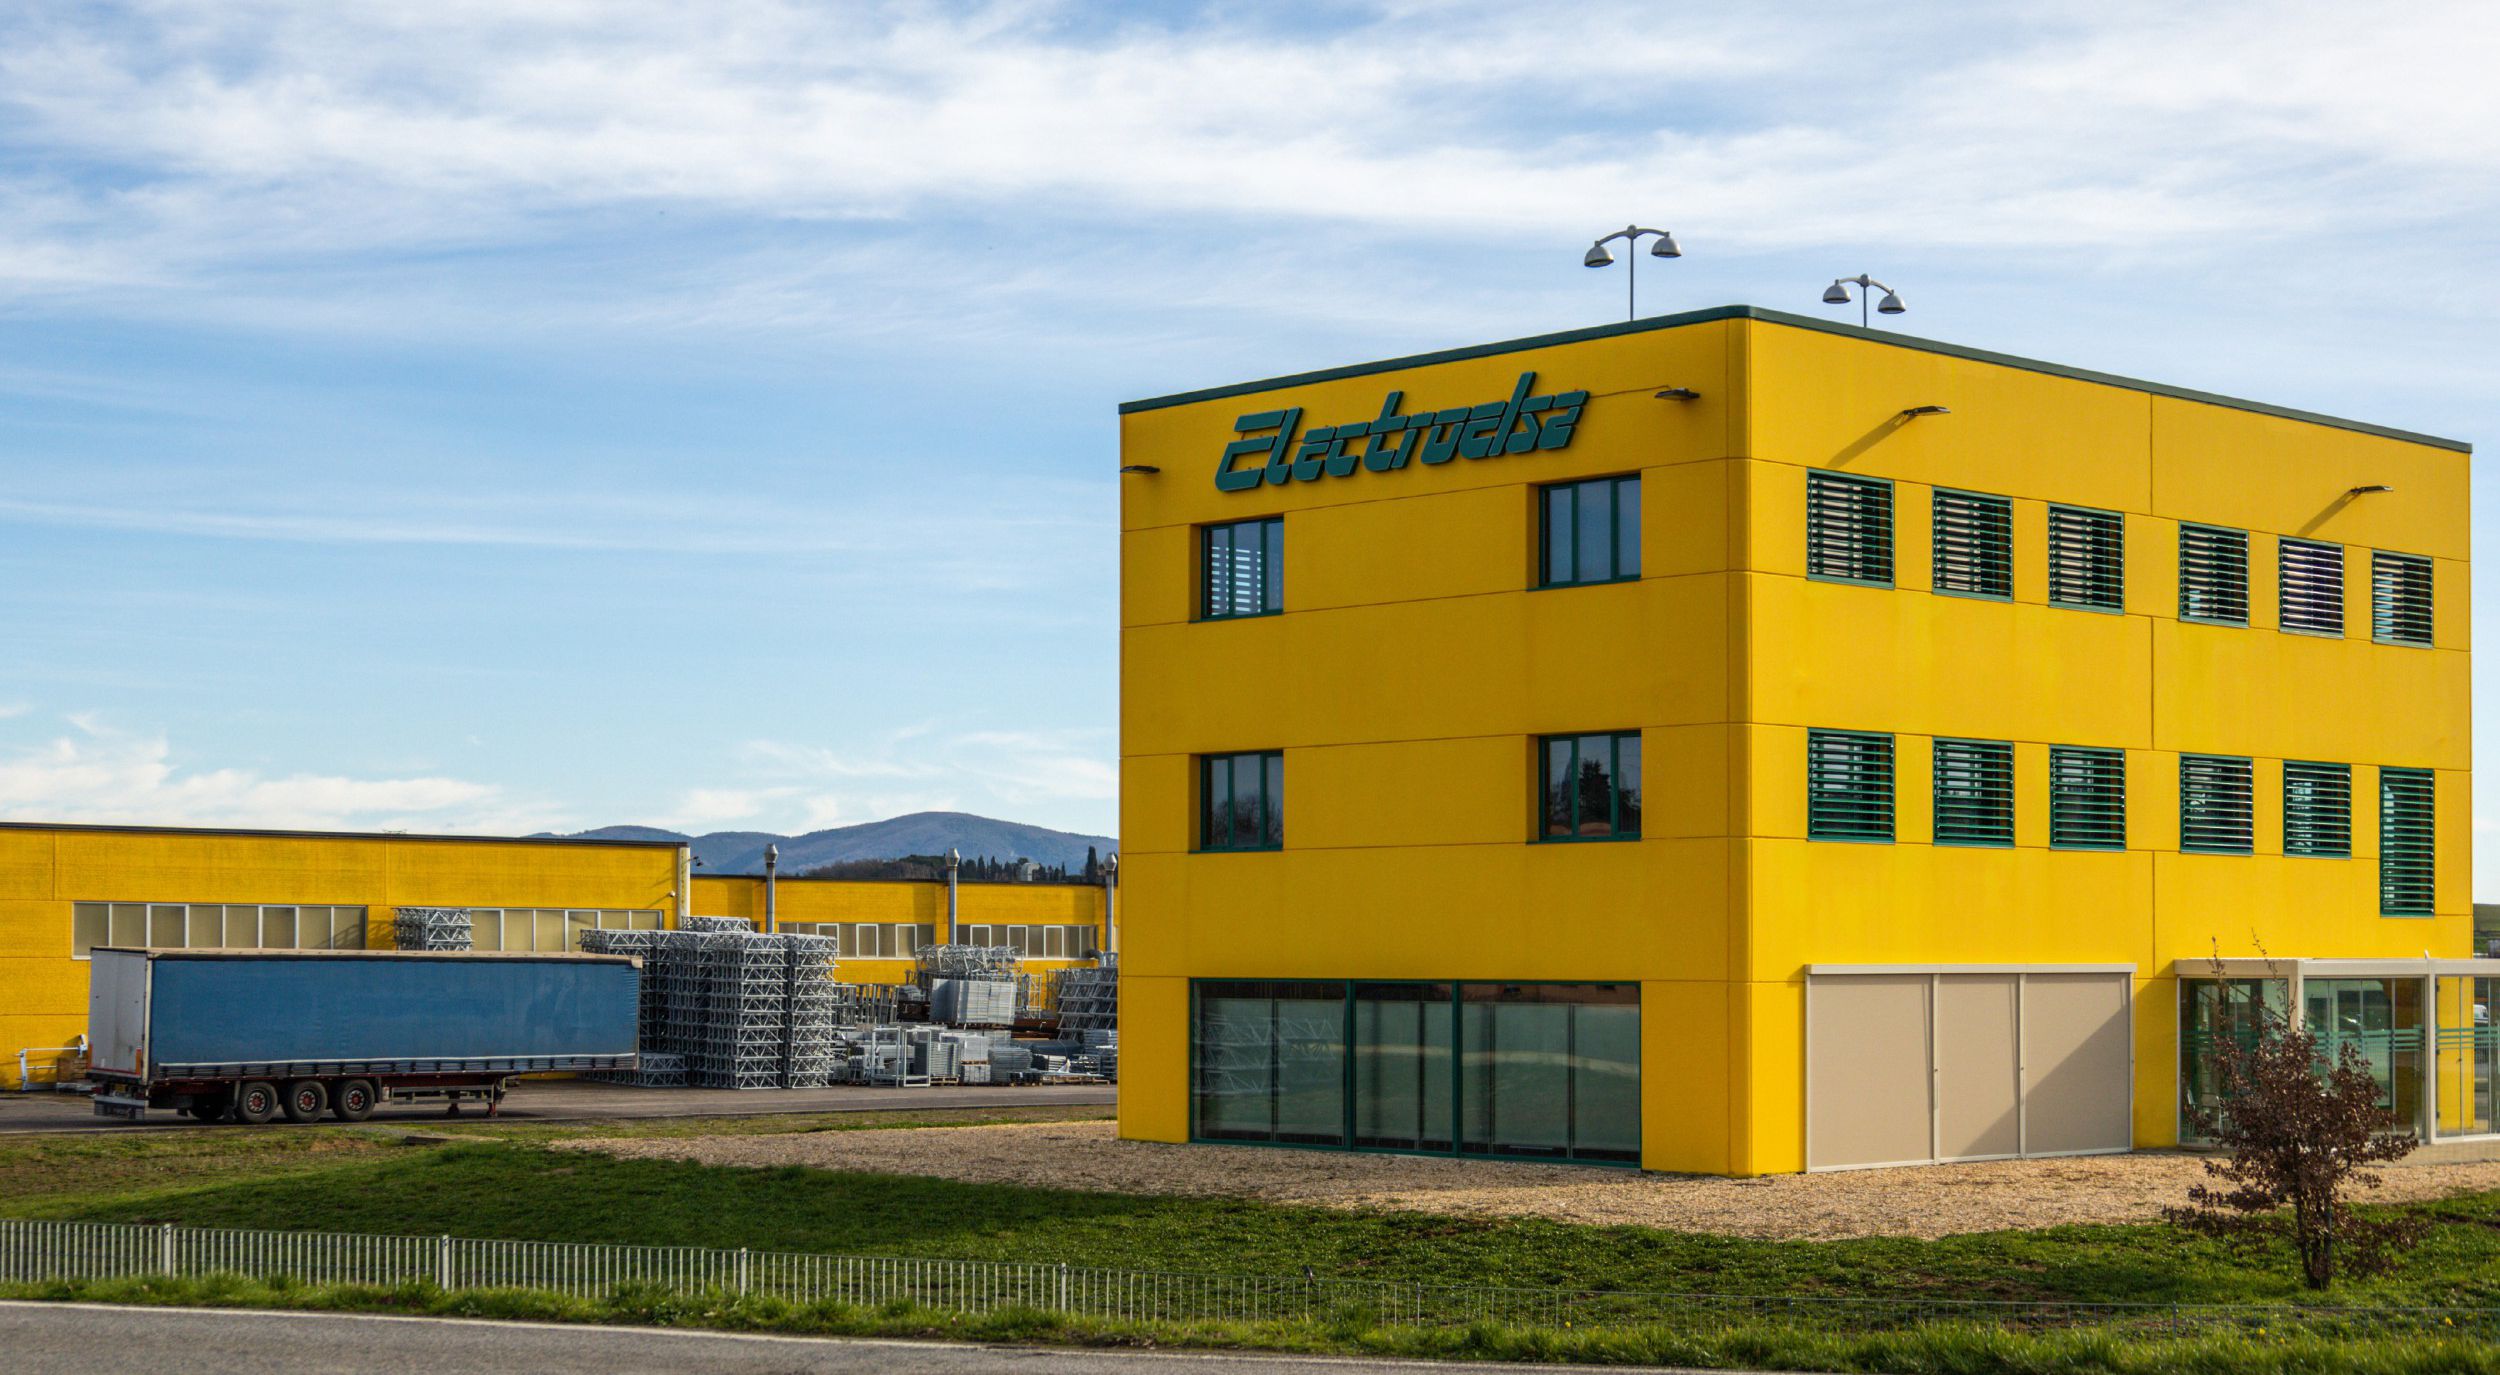 An overall photo of the Electroelsa company